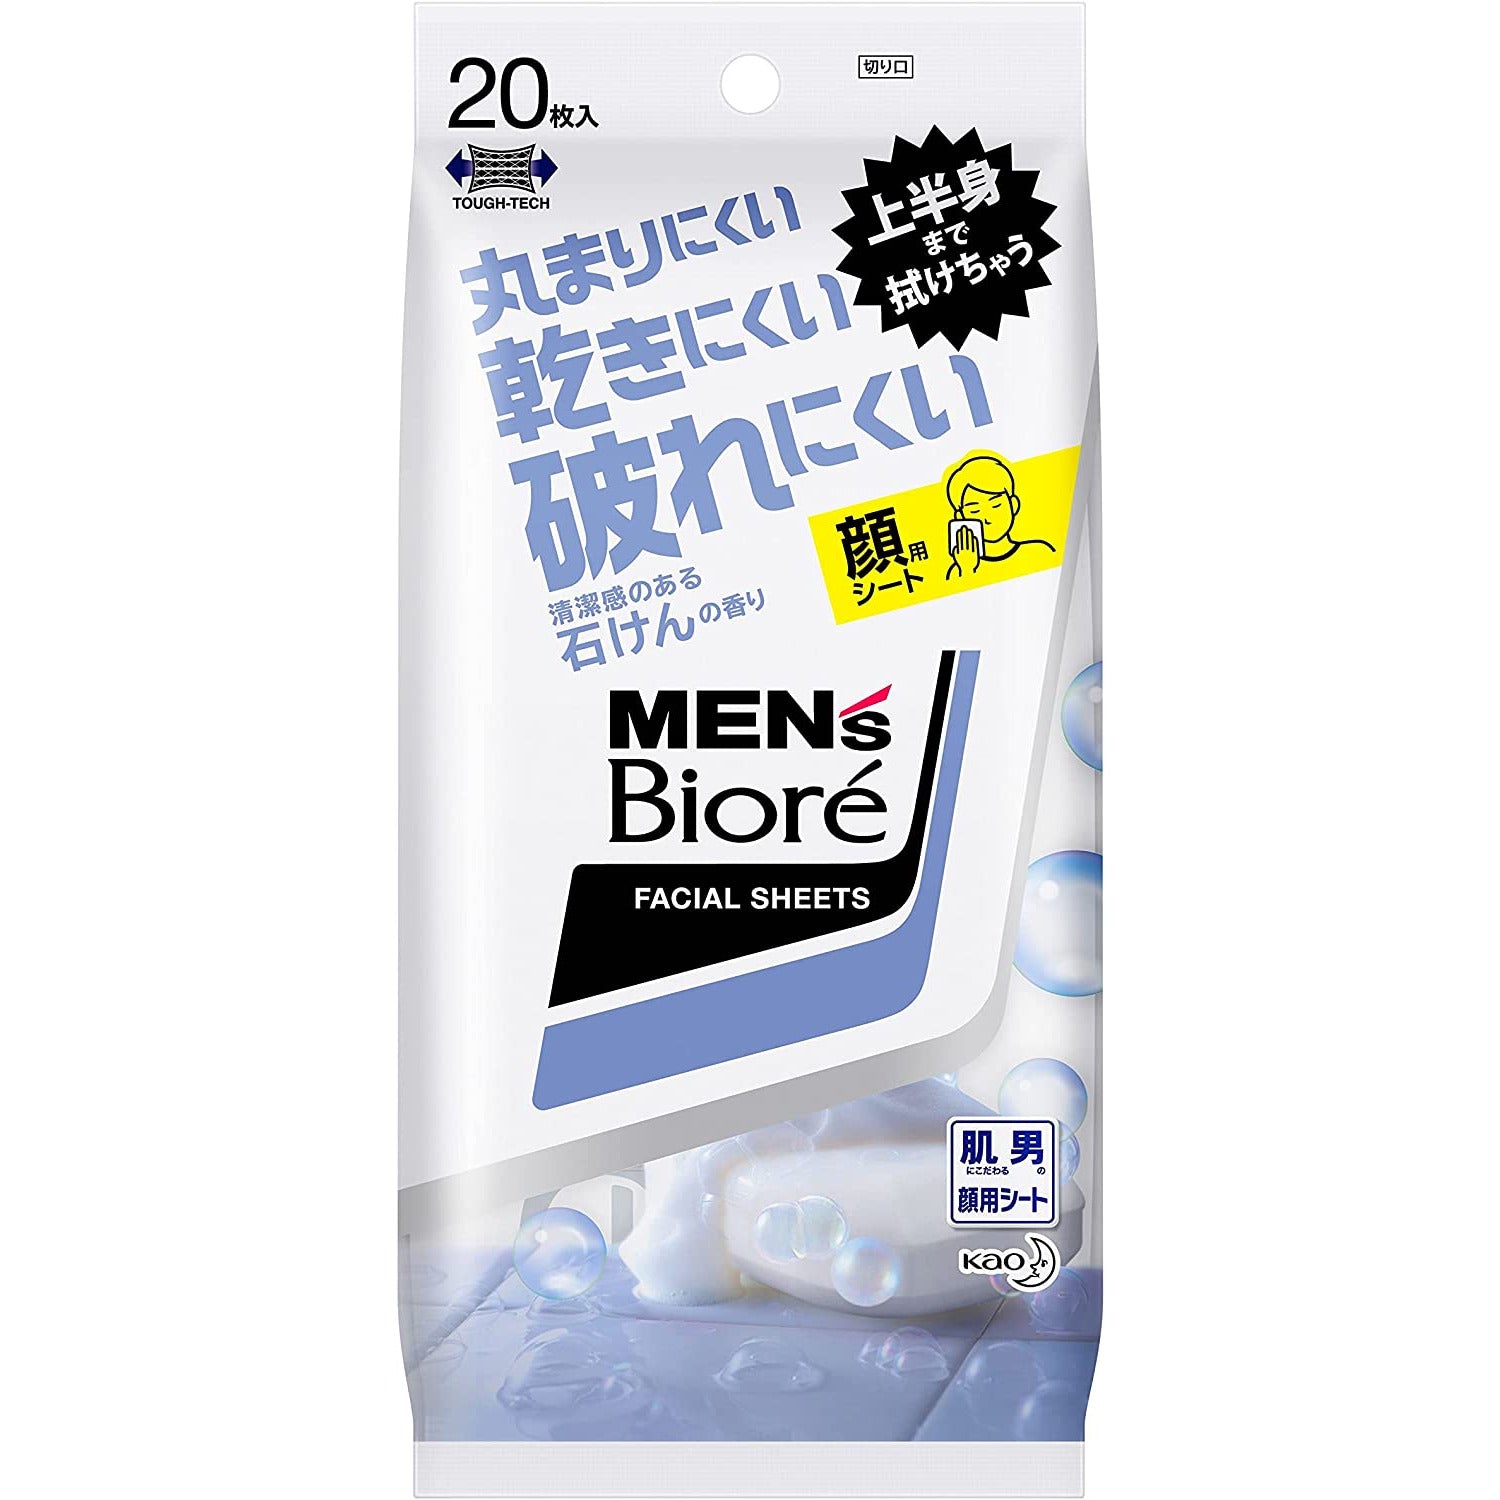 Kao Men's Biore Facial Cleansing Sheet Clean scent of soap 20 pieces for portable use